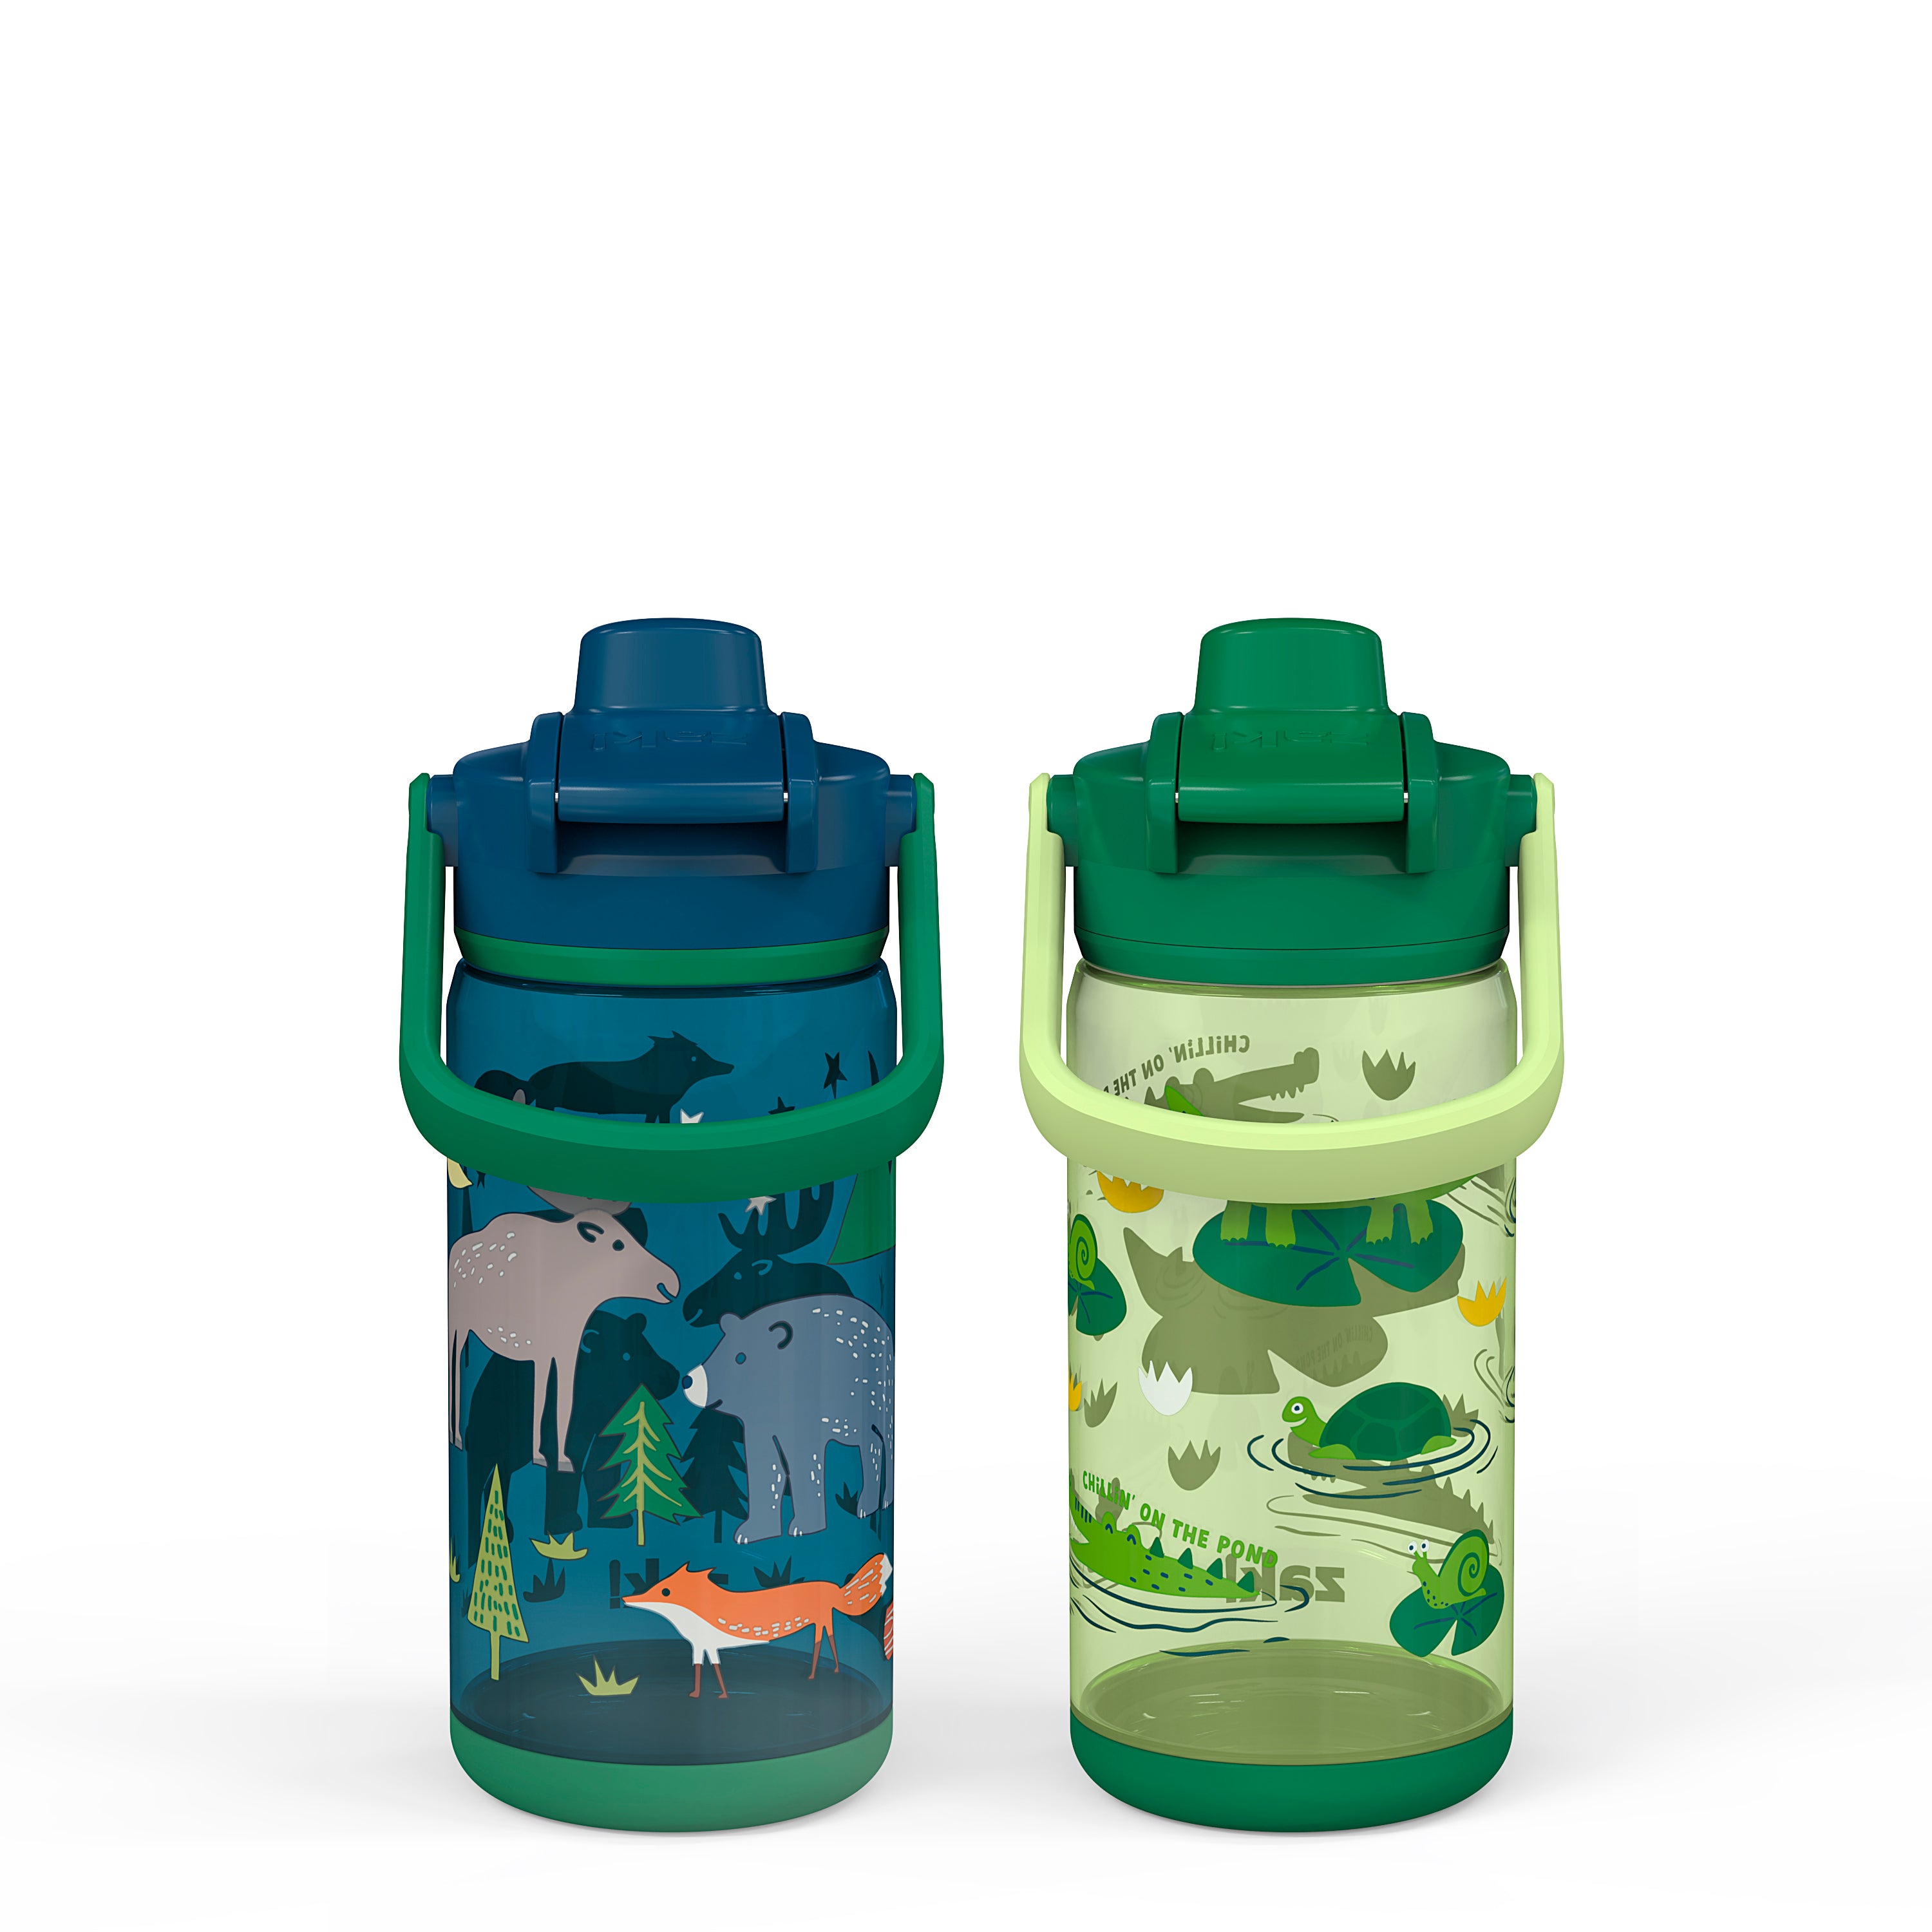 Beacon 2-Piece Kids Water Bottle Set with Covered Spout - Woodlands and Alligators, 16 Ounces